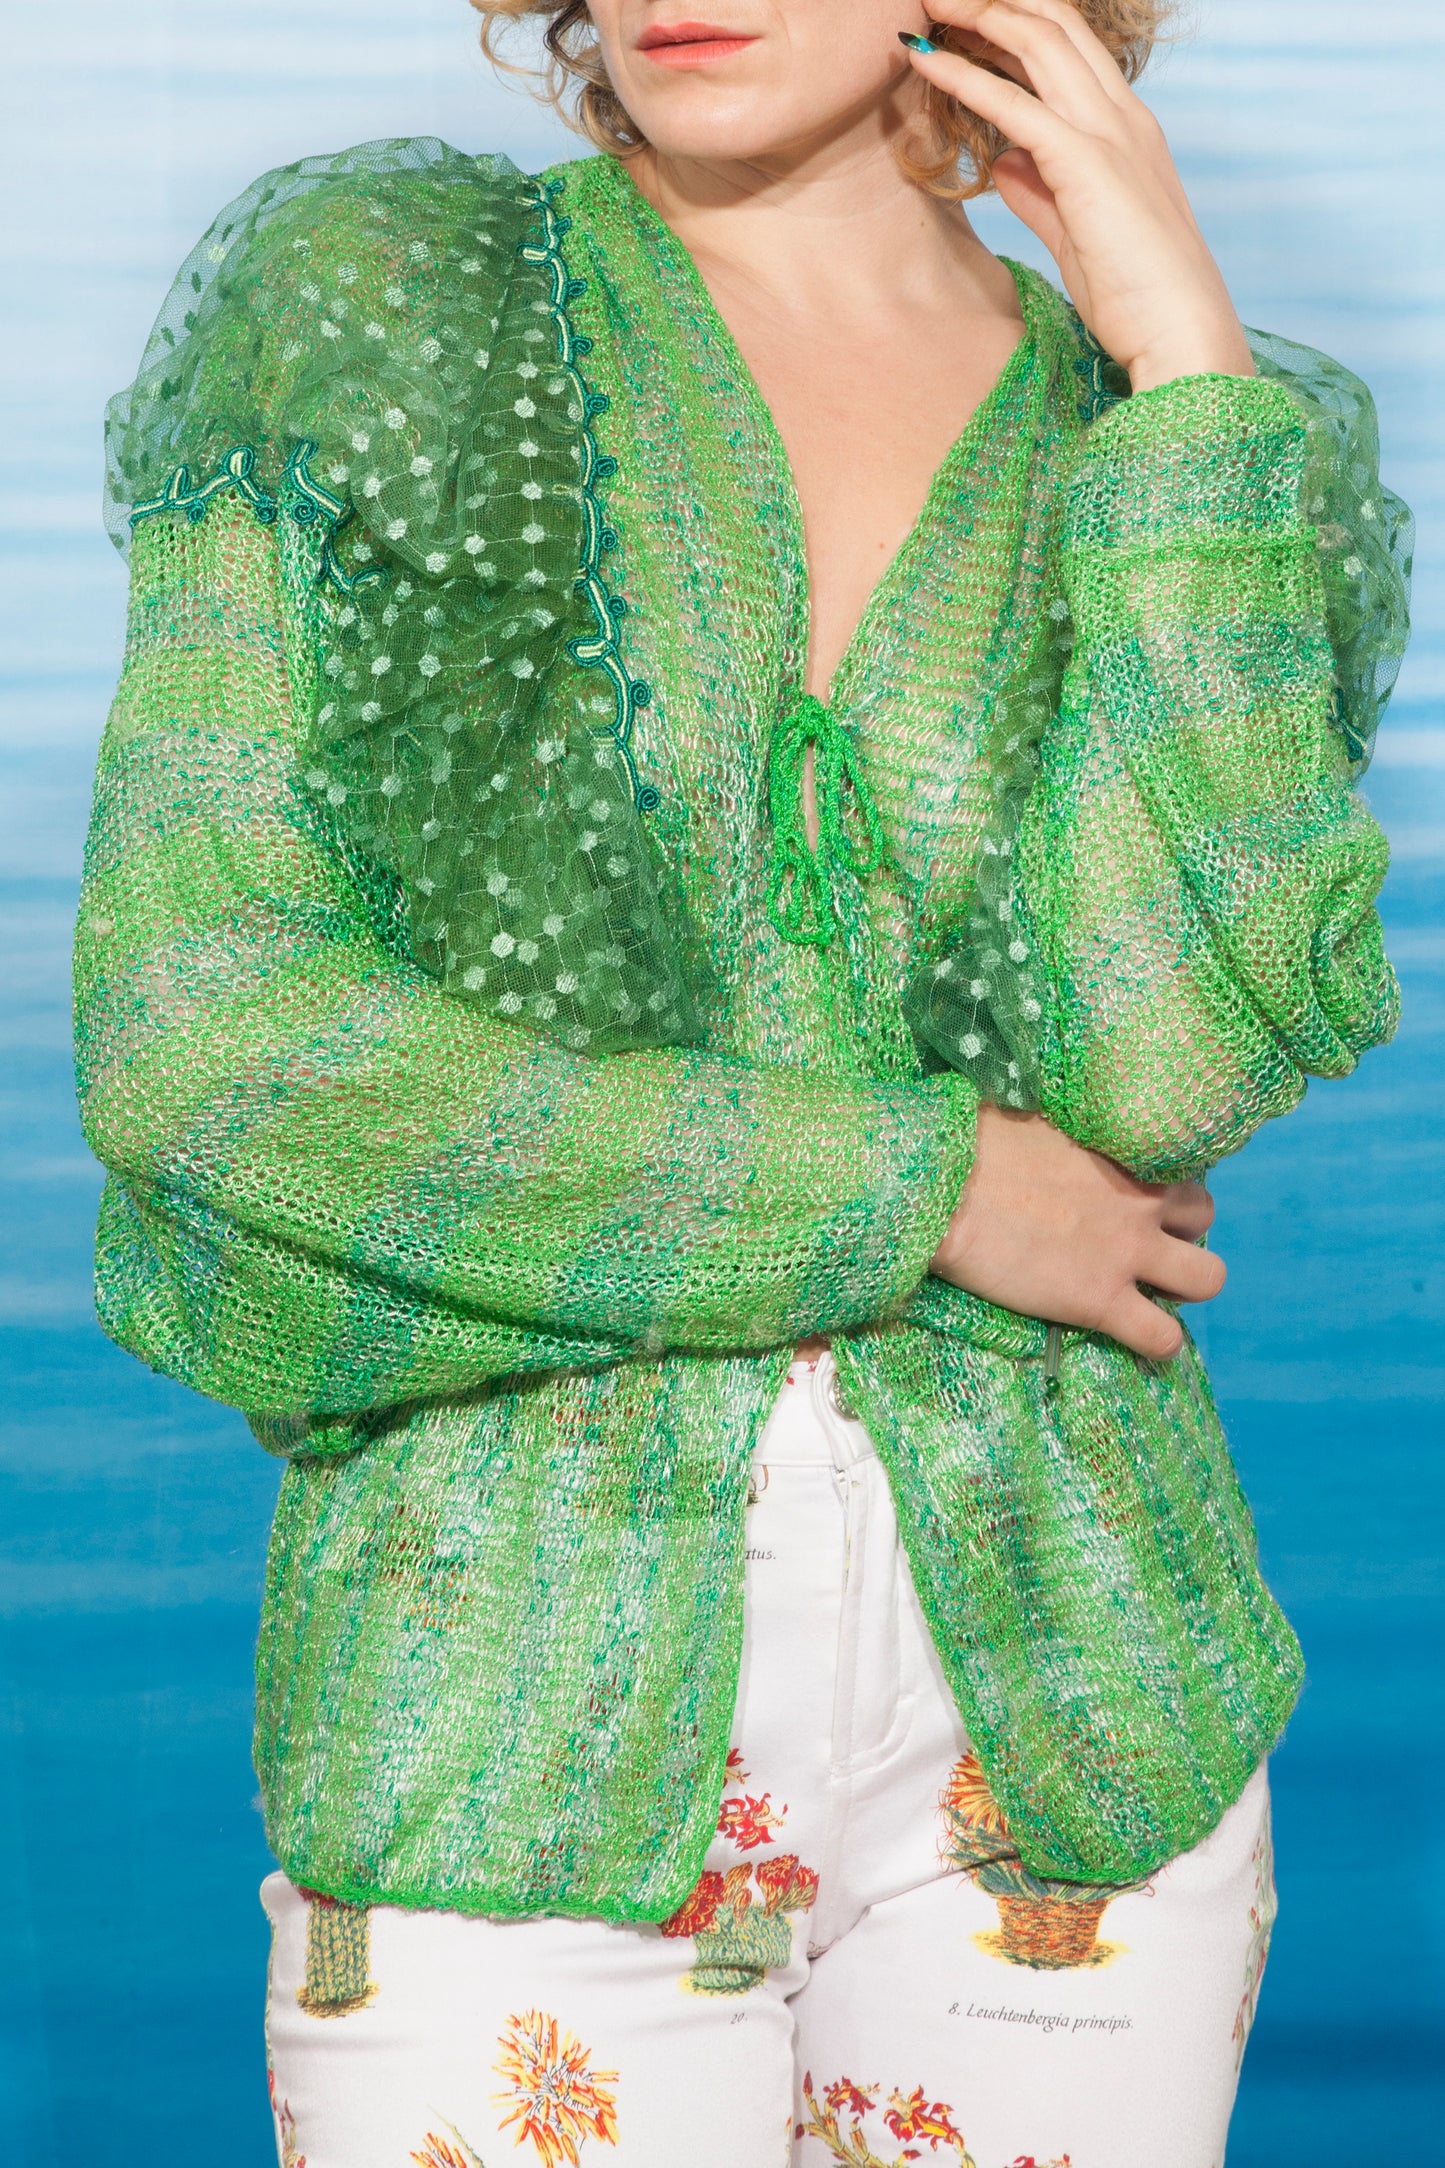 Mali 70's handknit green cardigan with puffy sheer shoulders